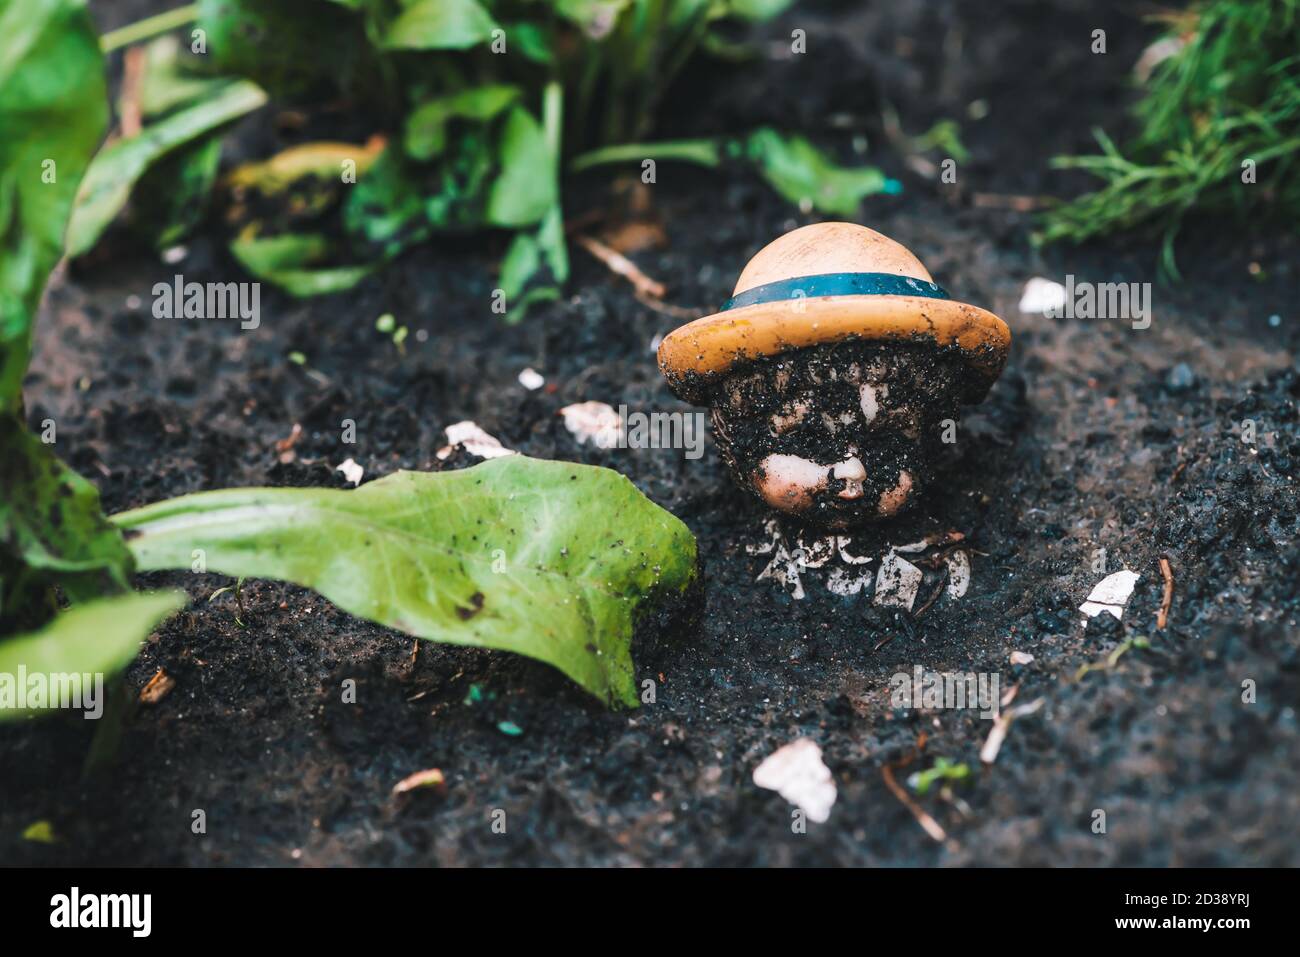 Dirty doll in soil near plants and trash. Old thrown soiled toy buried in ground. Sad pessimistic statuette in garden. Gloomy place. Melancholy backgr Stock Photo